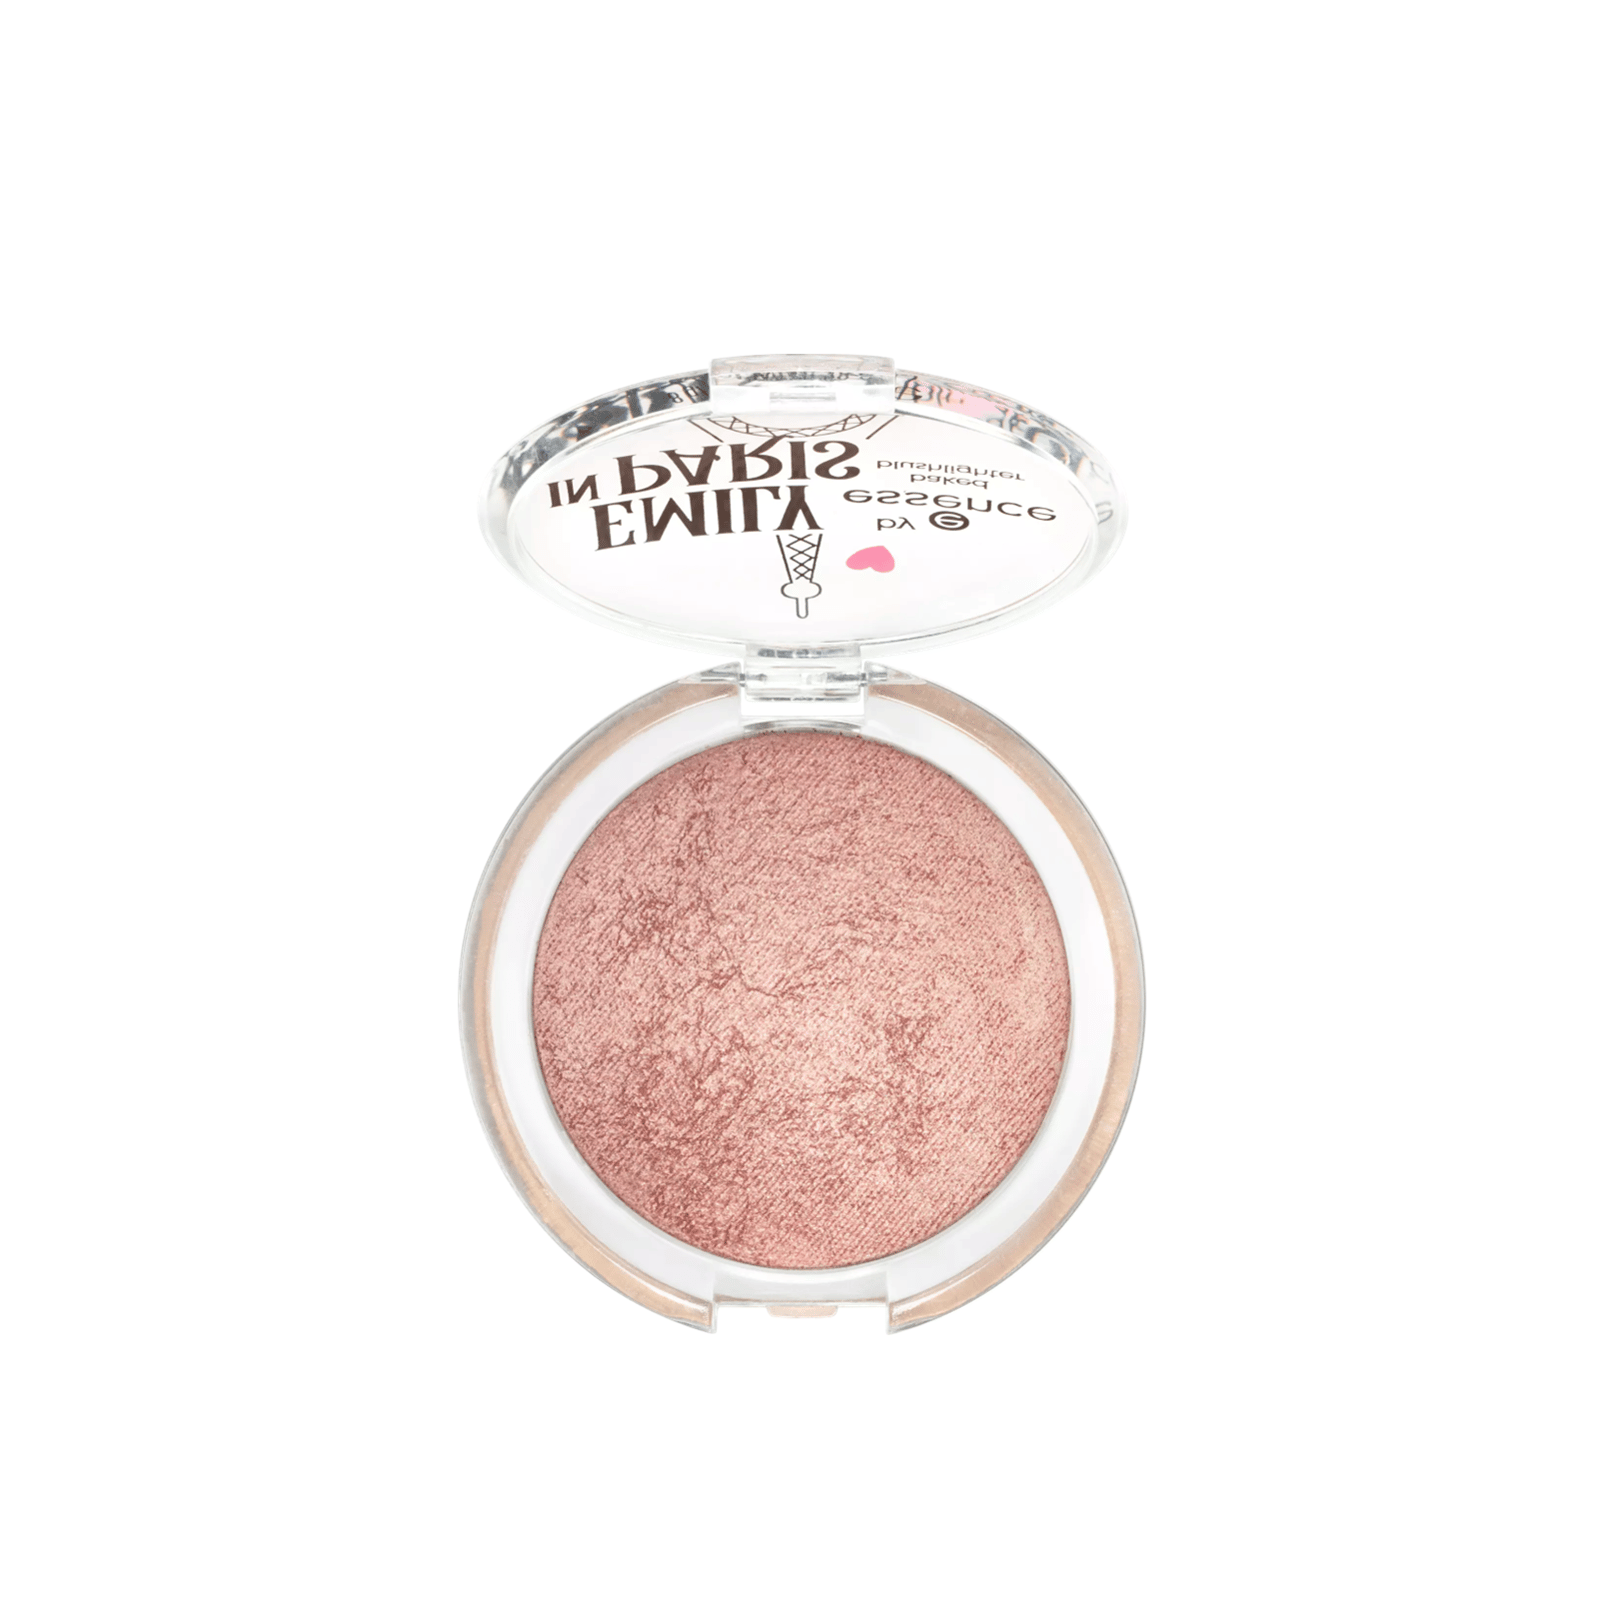 essence Emily In Paris Baked Blushlighter 01 #SayOuiToPossibility 8g